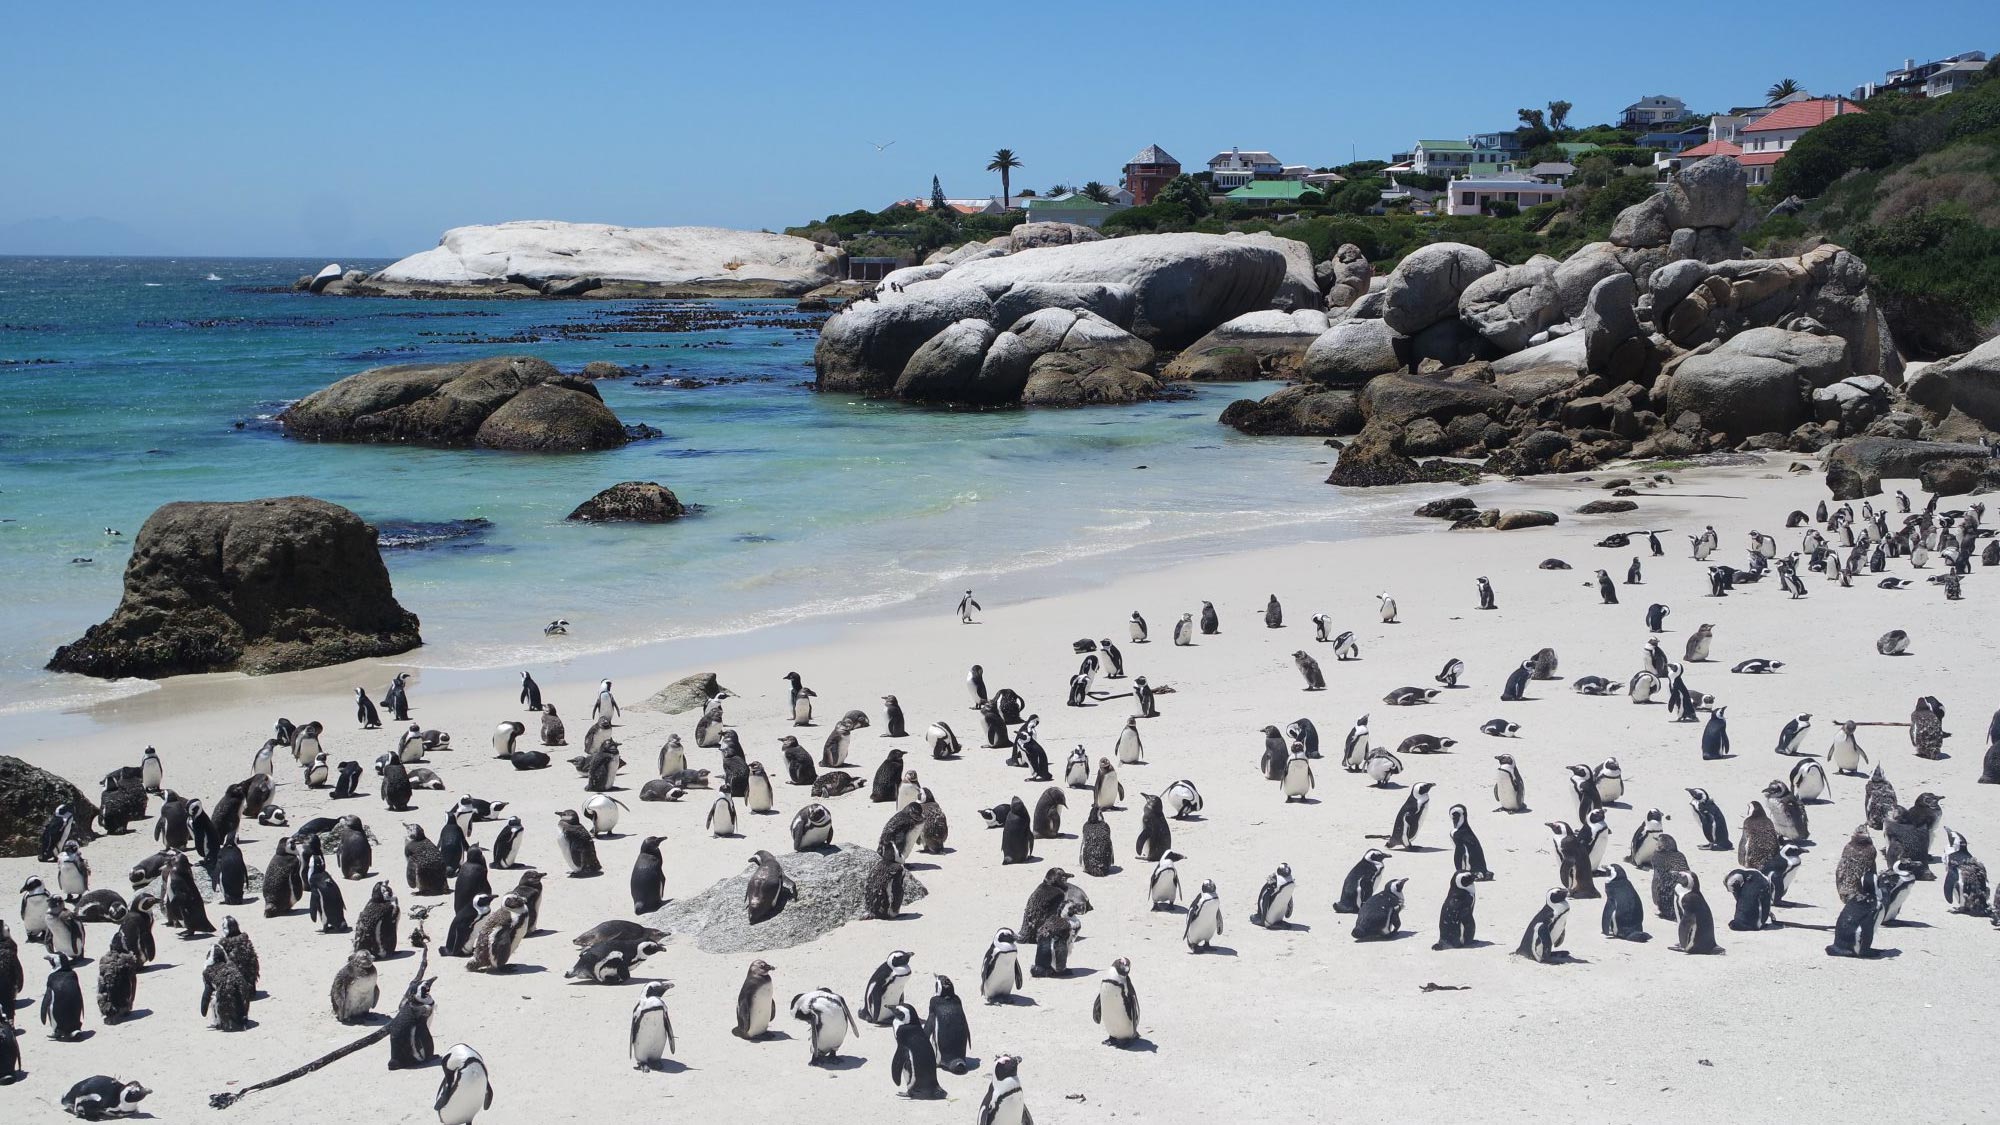 Discover Cape Town from the skies on a pilot's journey, capturing the scenic beauty of the city. Enjoy an encounter with penguins on the beach and take a cable car ride up Table Mountain for stunning vistas.